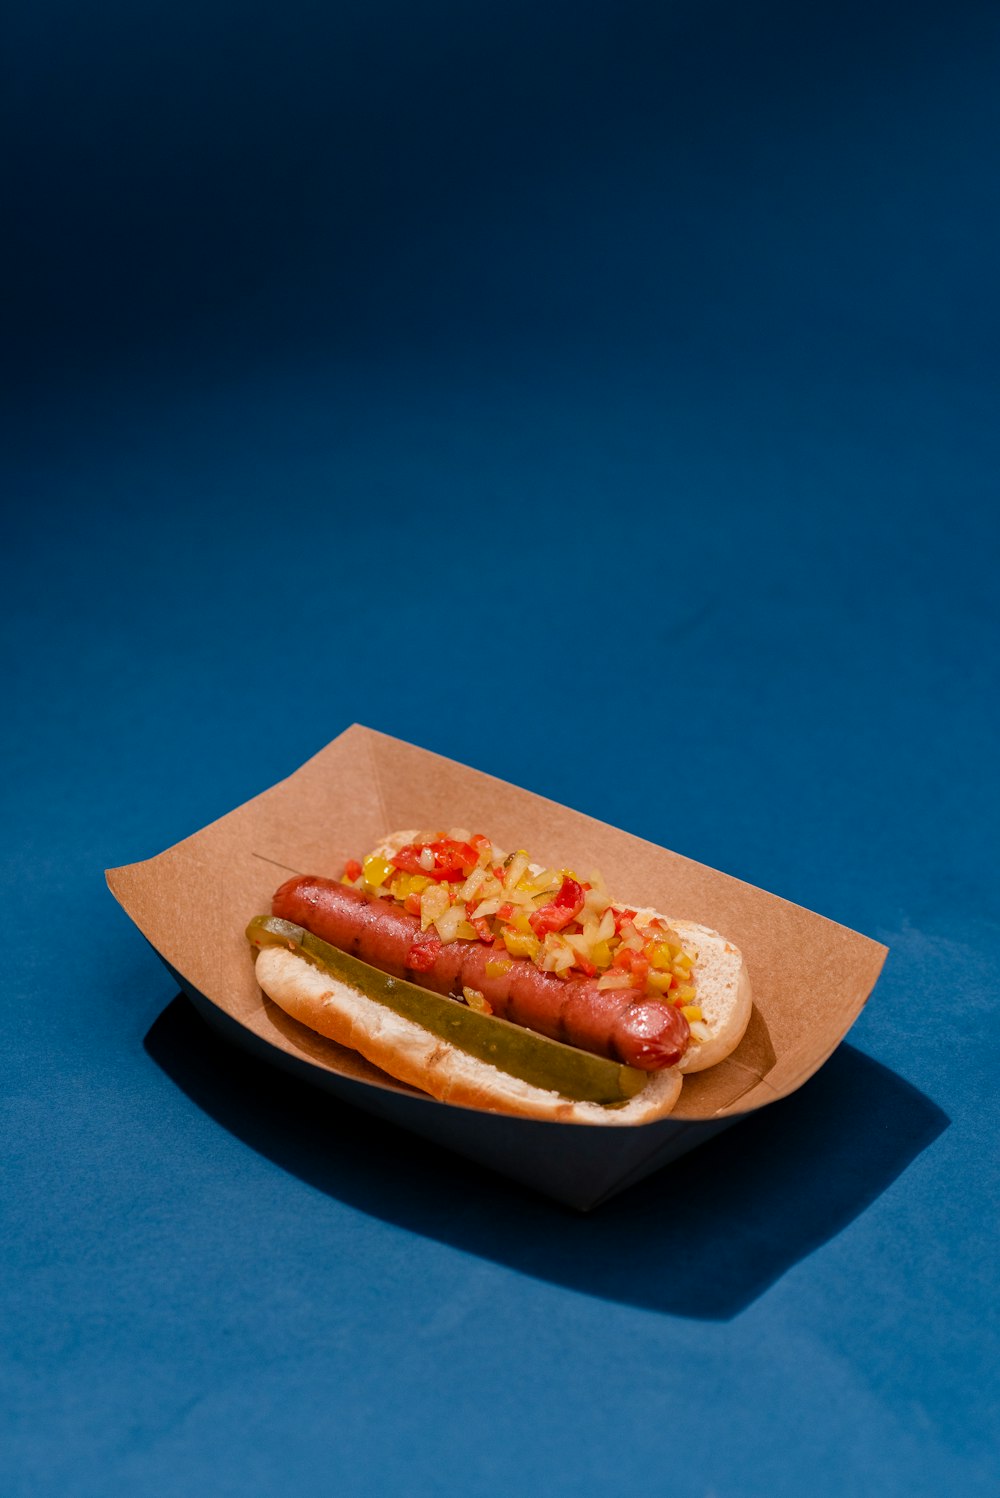 a hot dog with relish and mustard on a bun